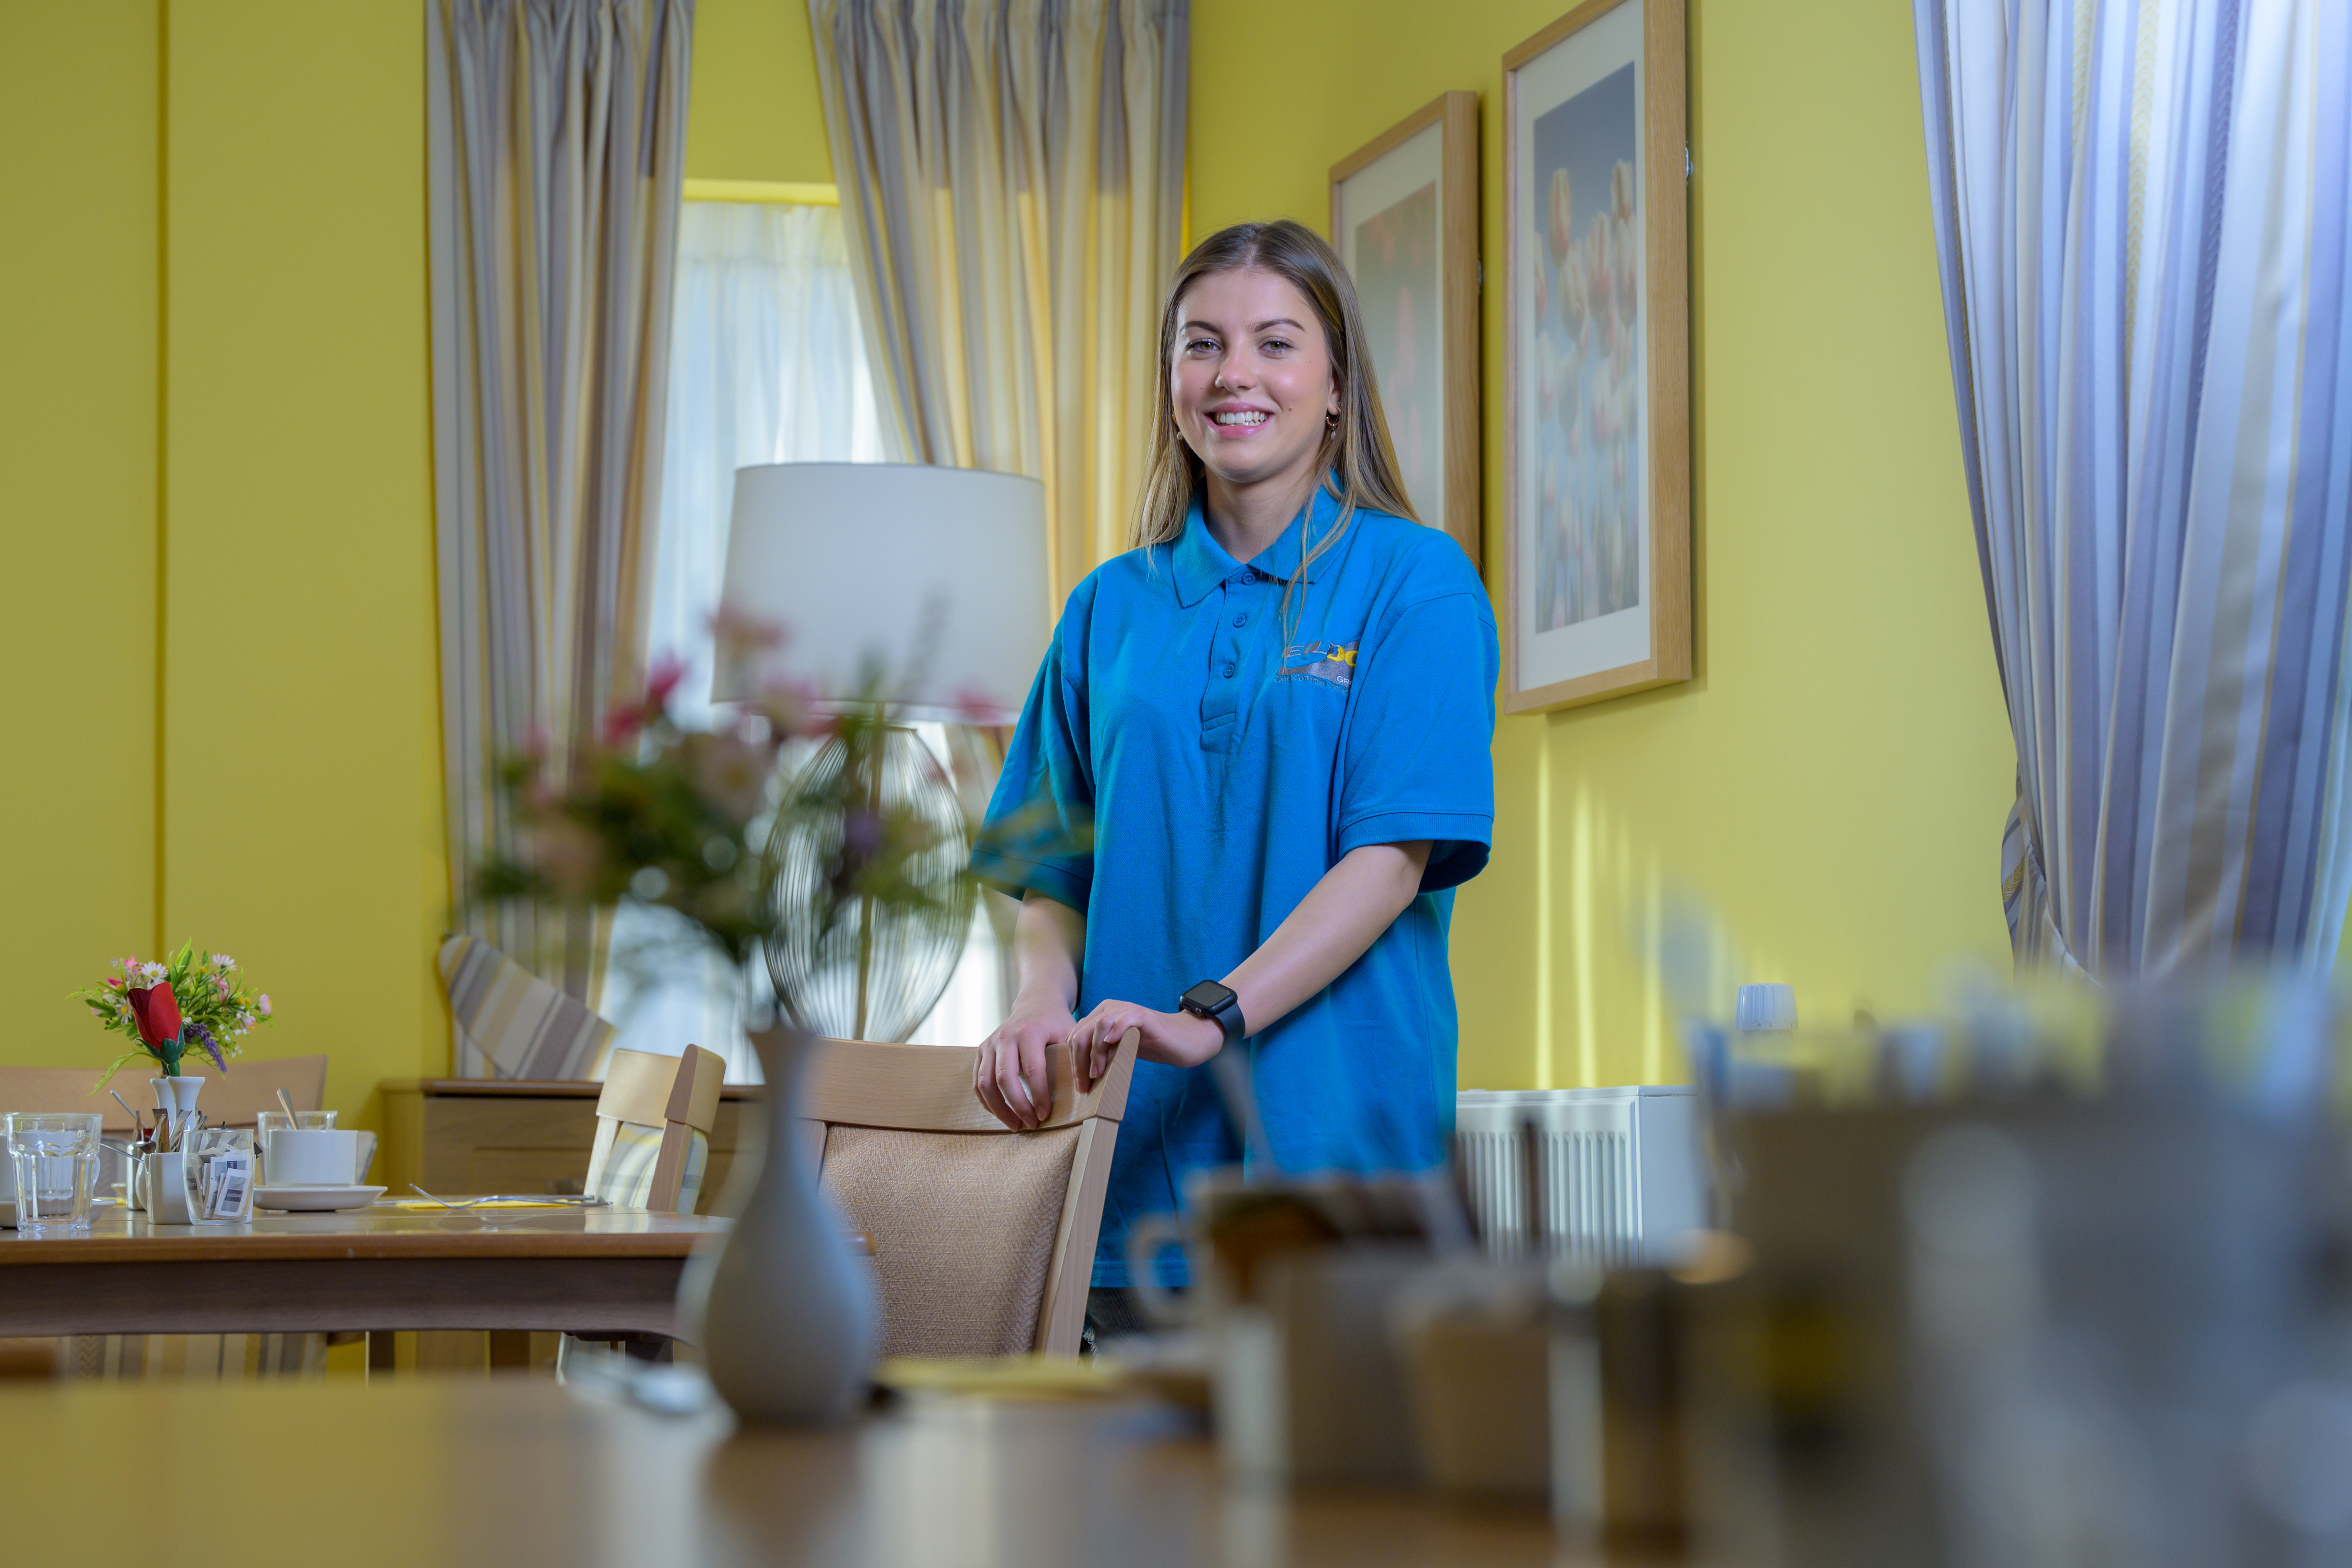 Martyna stands in a sunny dining room, wearing a blue polo shirt. The walls are bright yellow, with vases of flowers on the table.